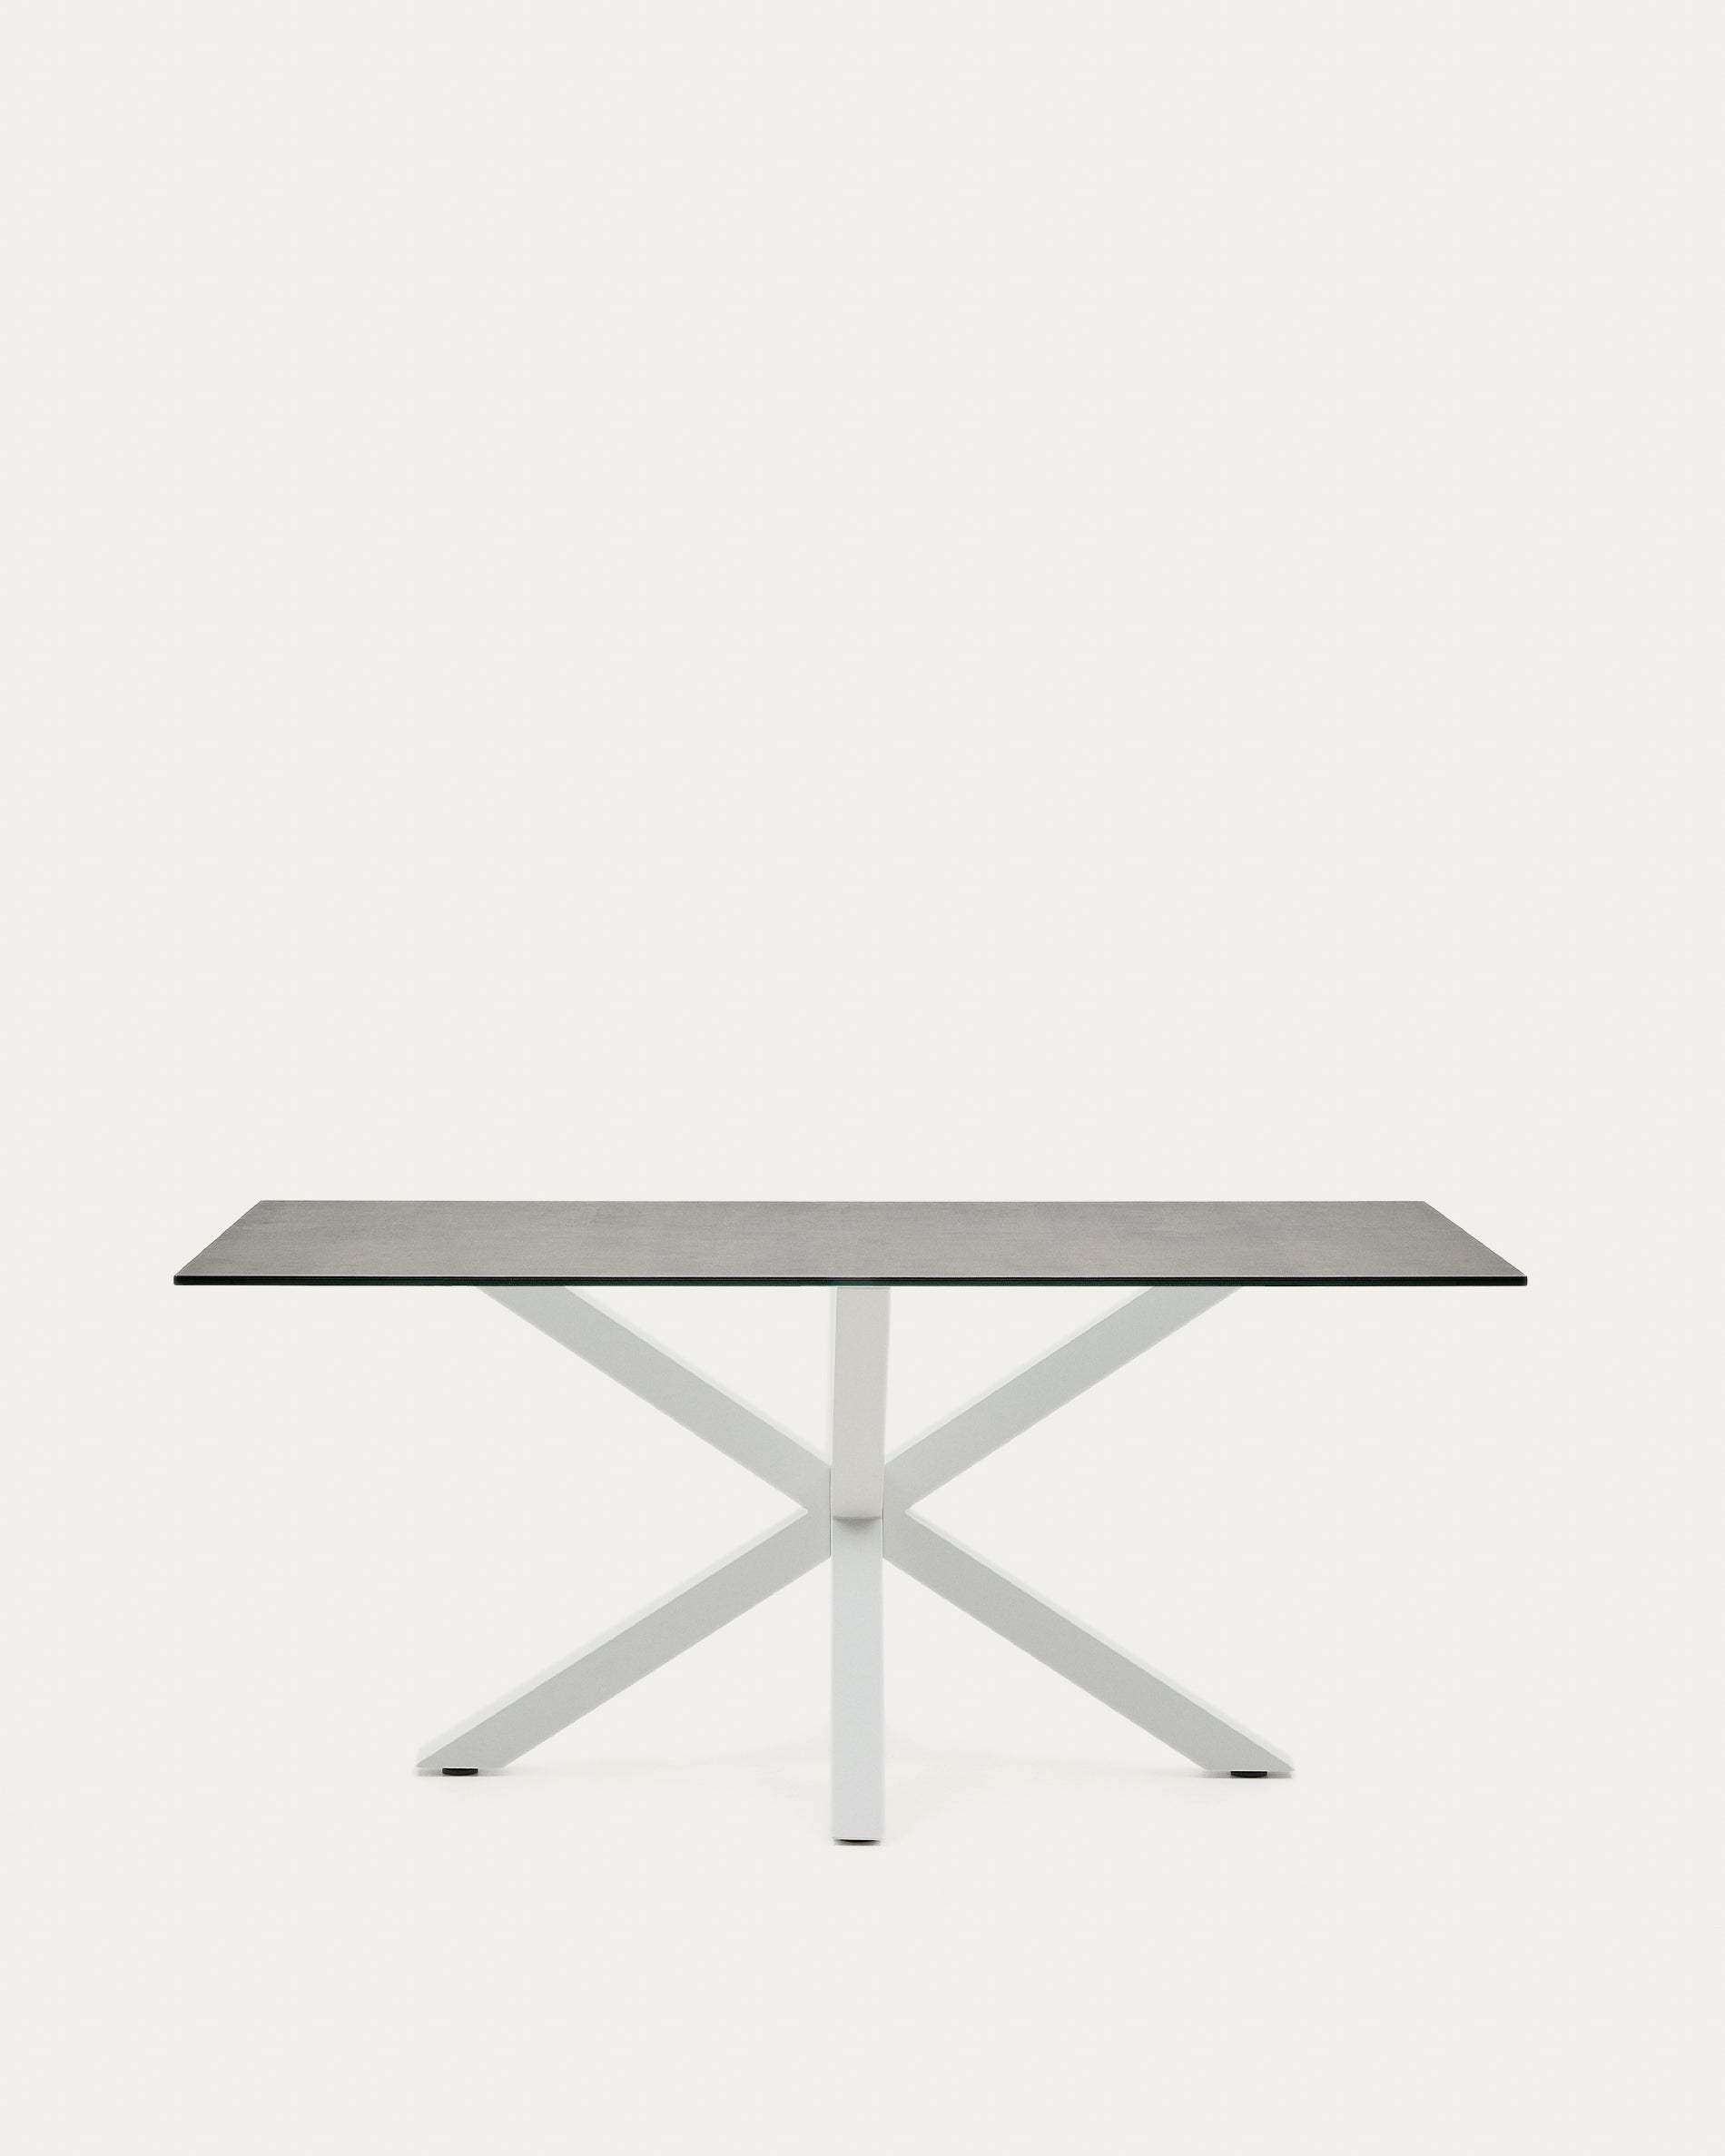 Argo table in Iron Moss porcelain and steel legs, white finish, 160 x 90 cm